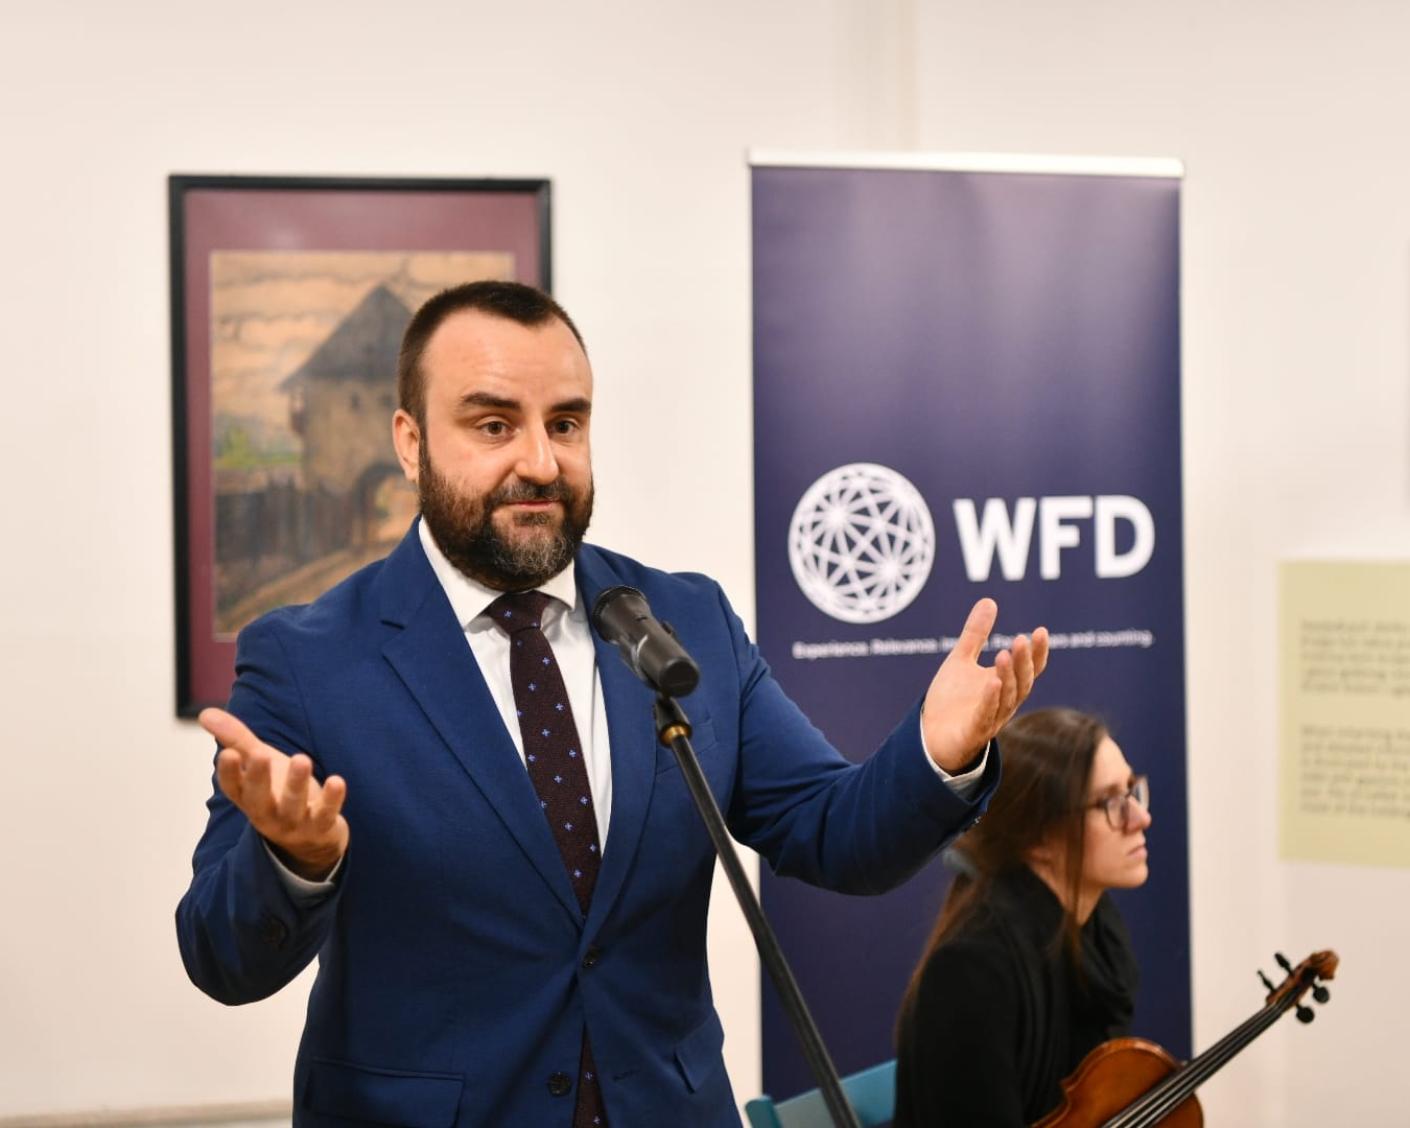 WFD's Deputy Director for the Western Balkans gives an address at an event in Bosnia and Herzegovina